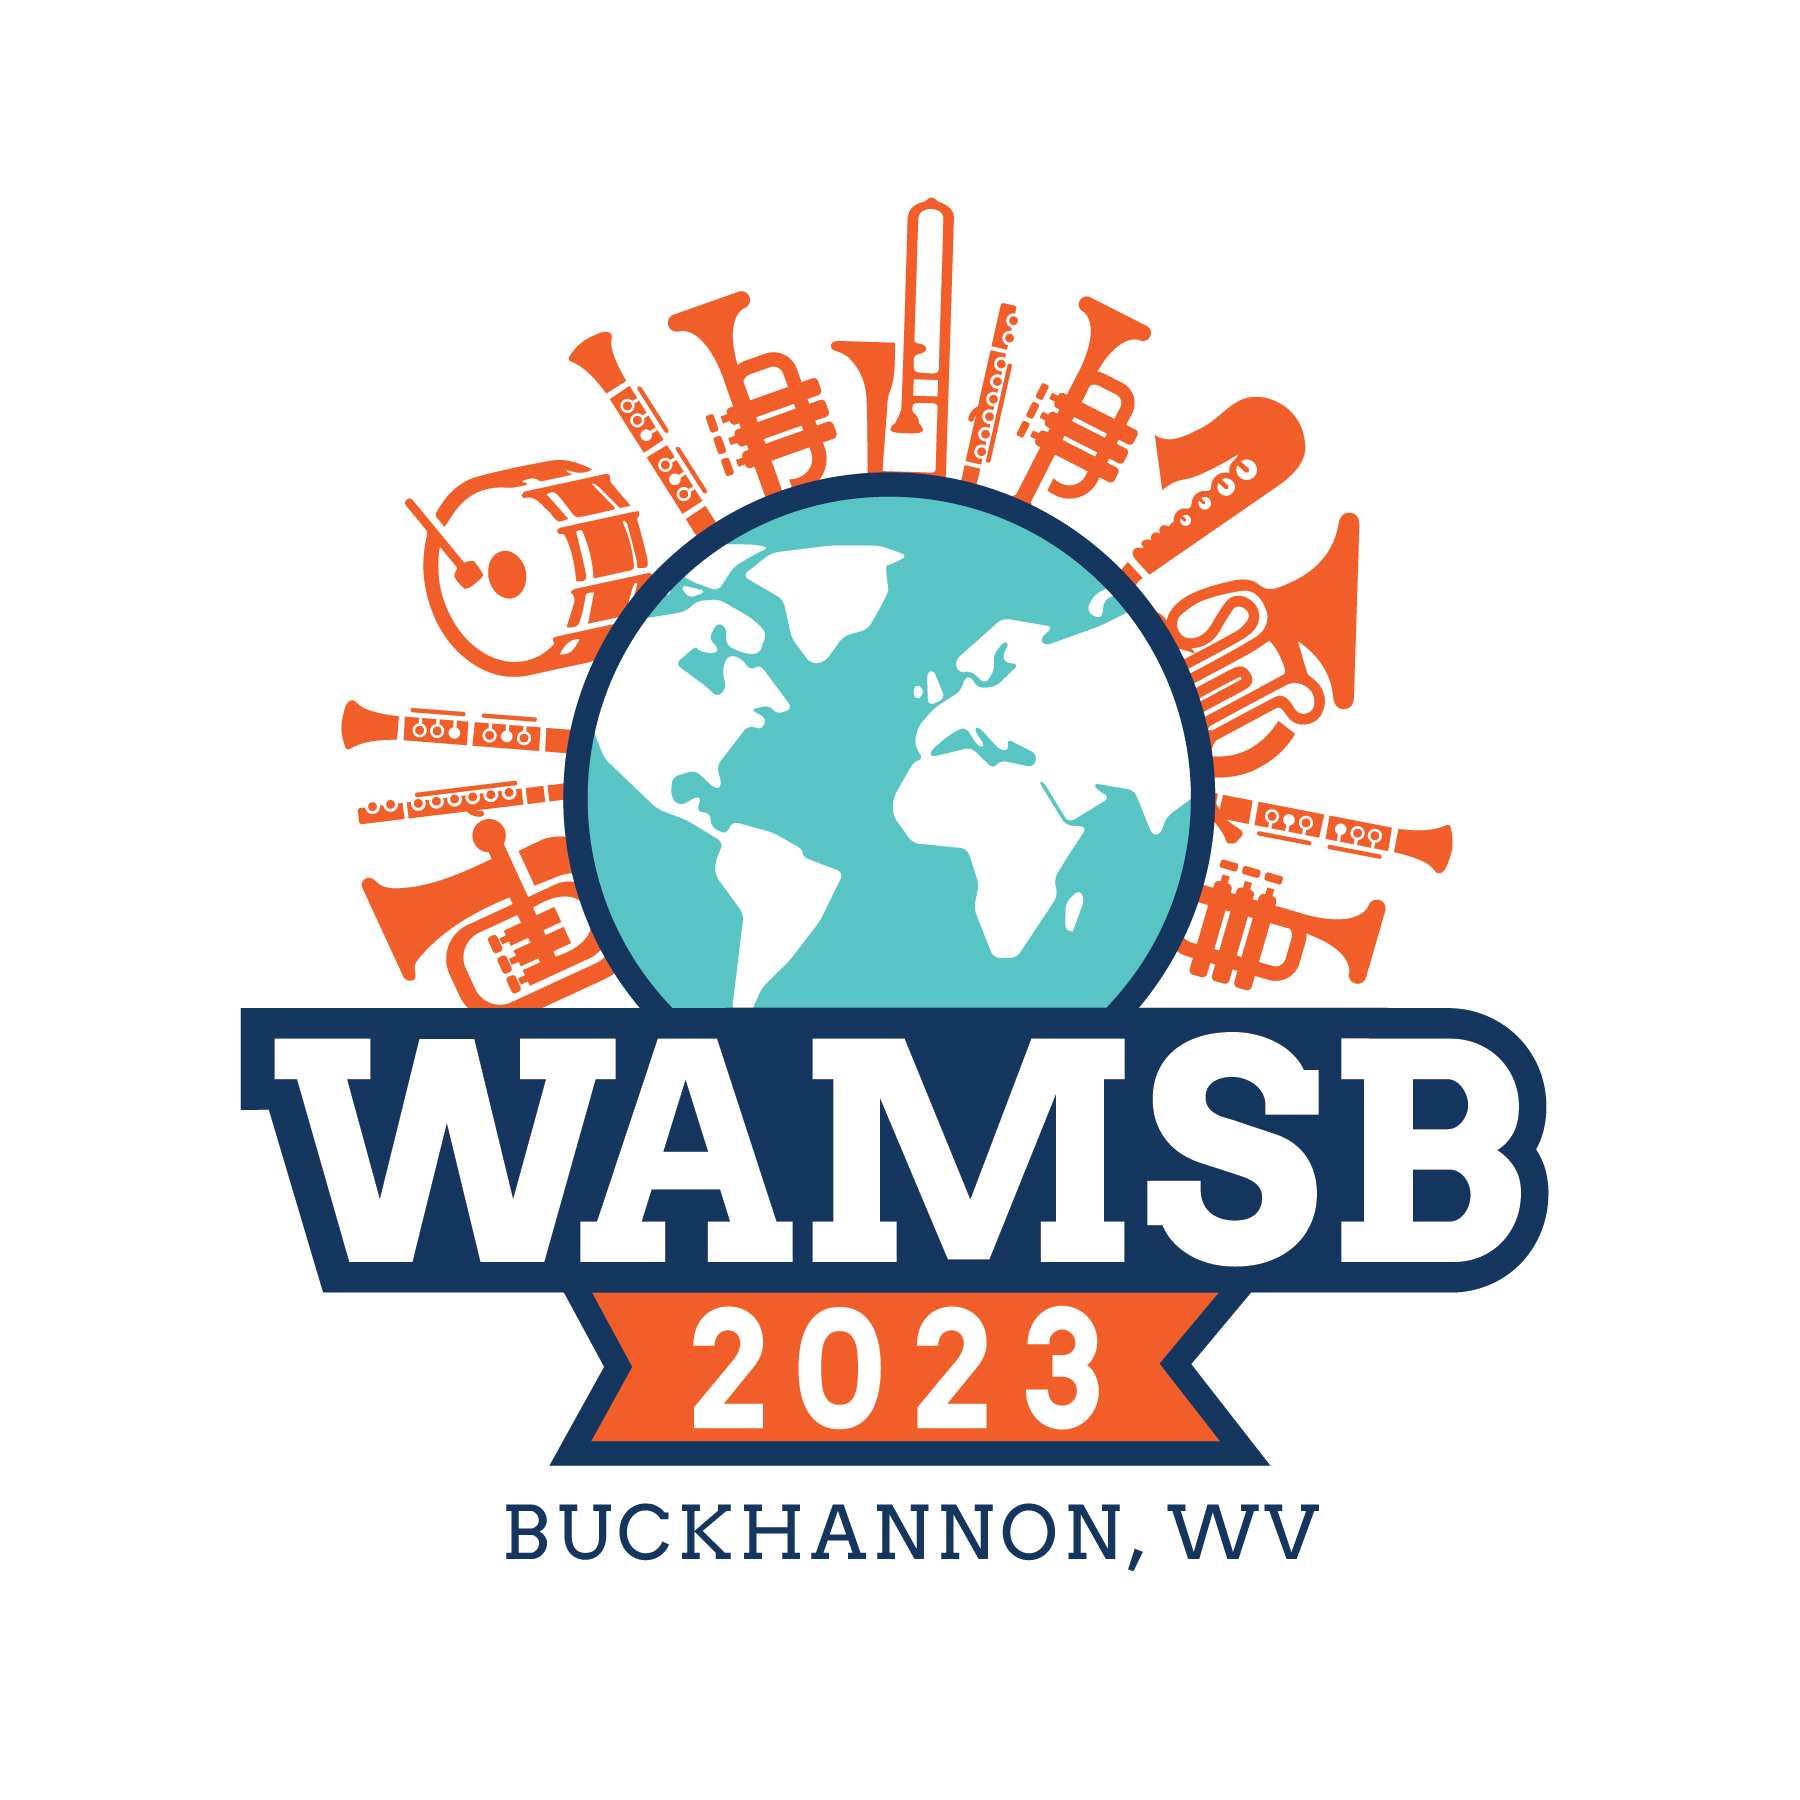 The World Association of Marching Show Bands 2023 championship in Buckhannon, WV logo